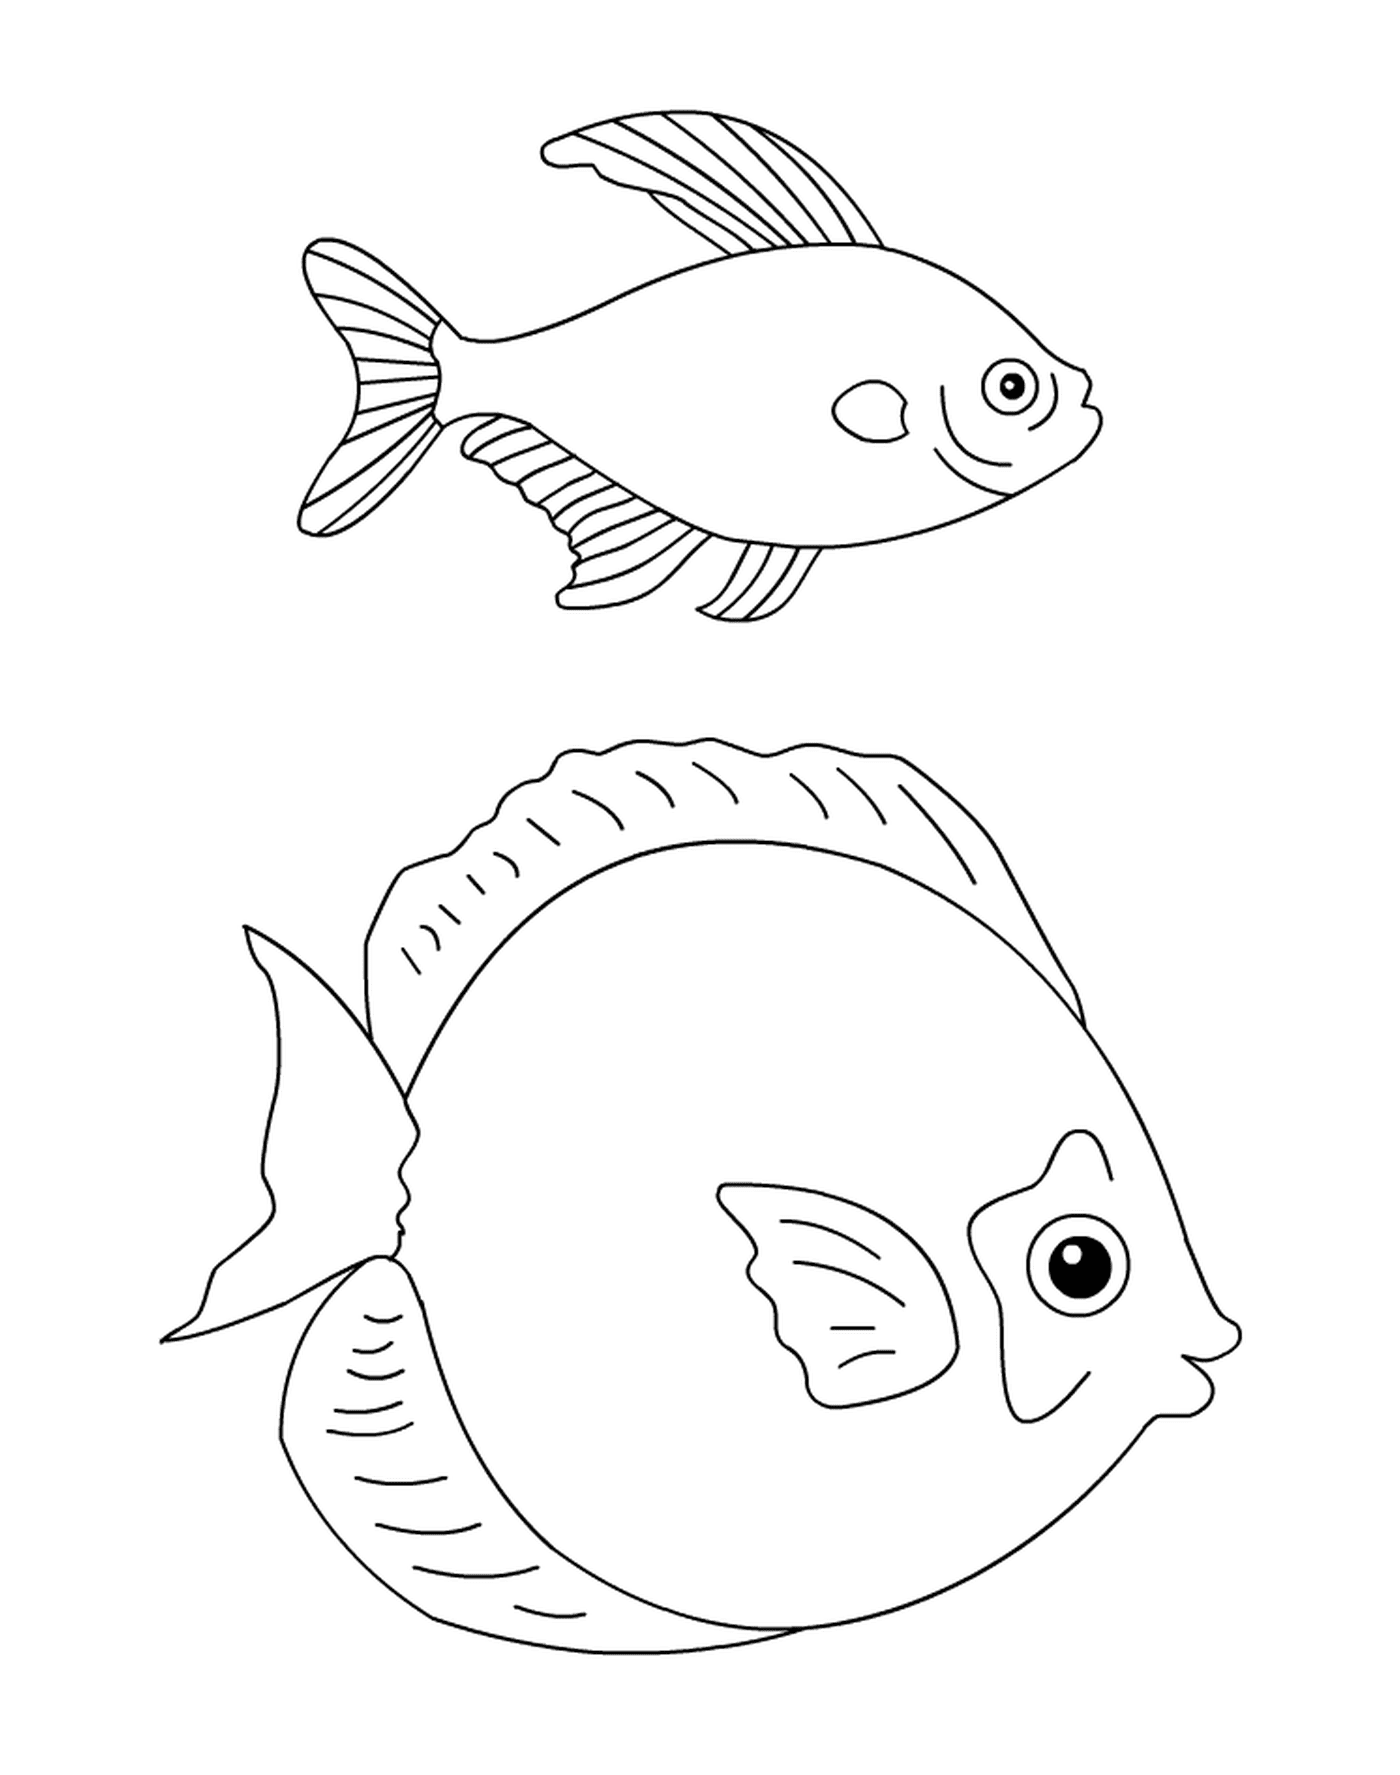  A fish and an animal drawn together 